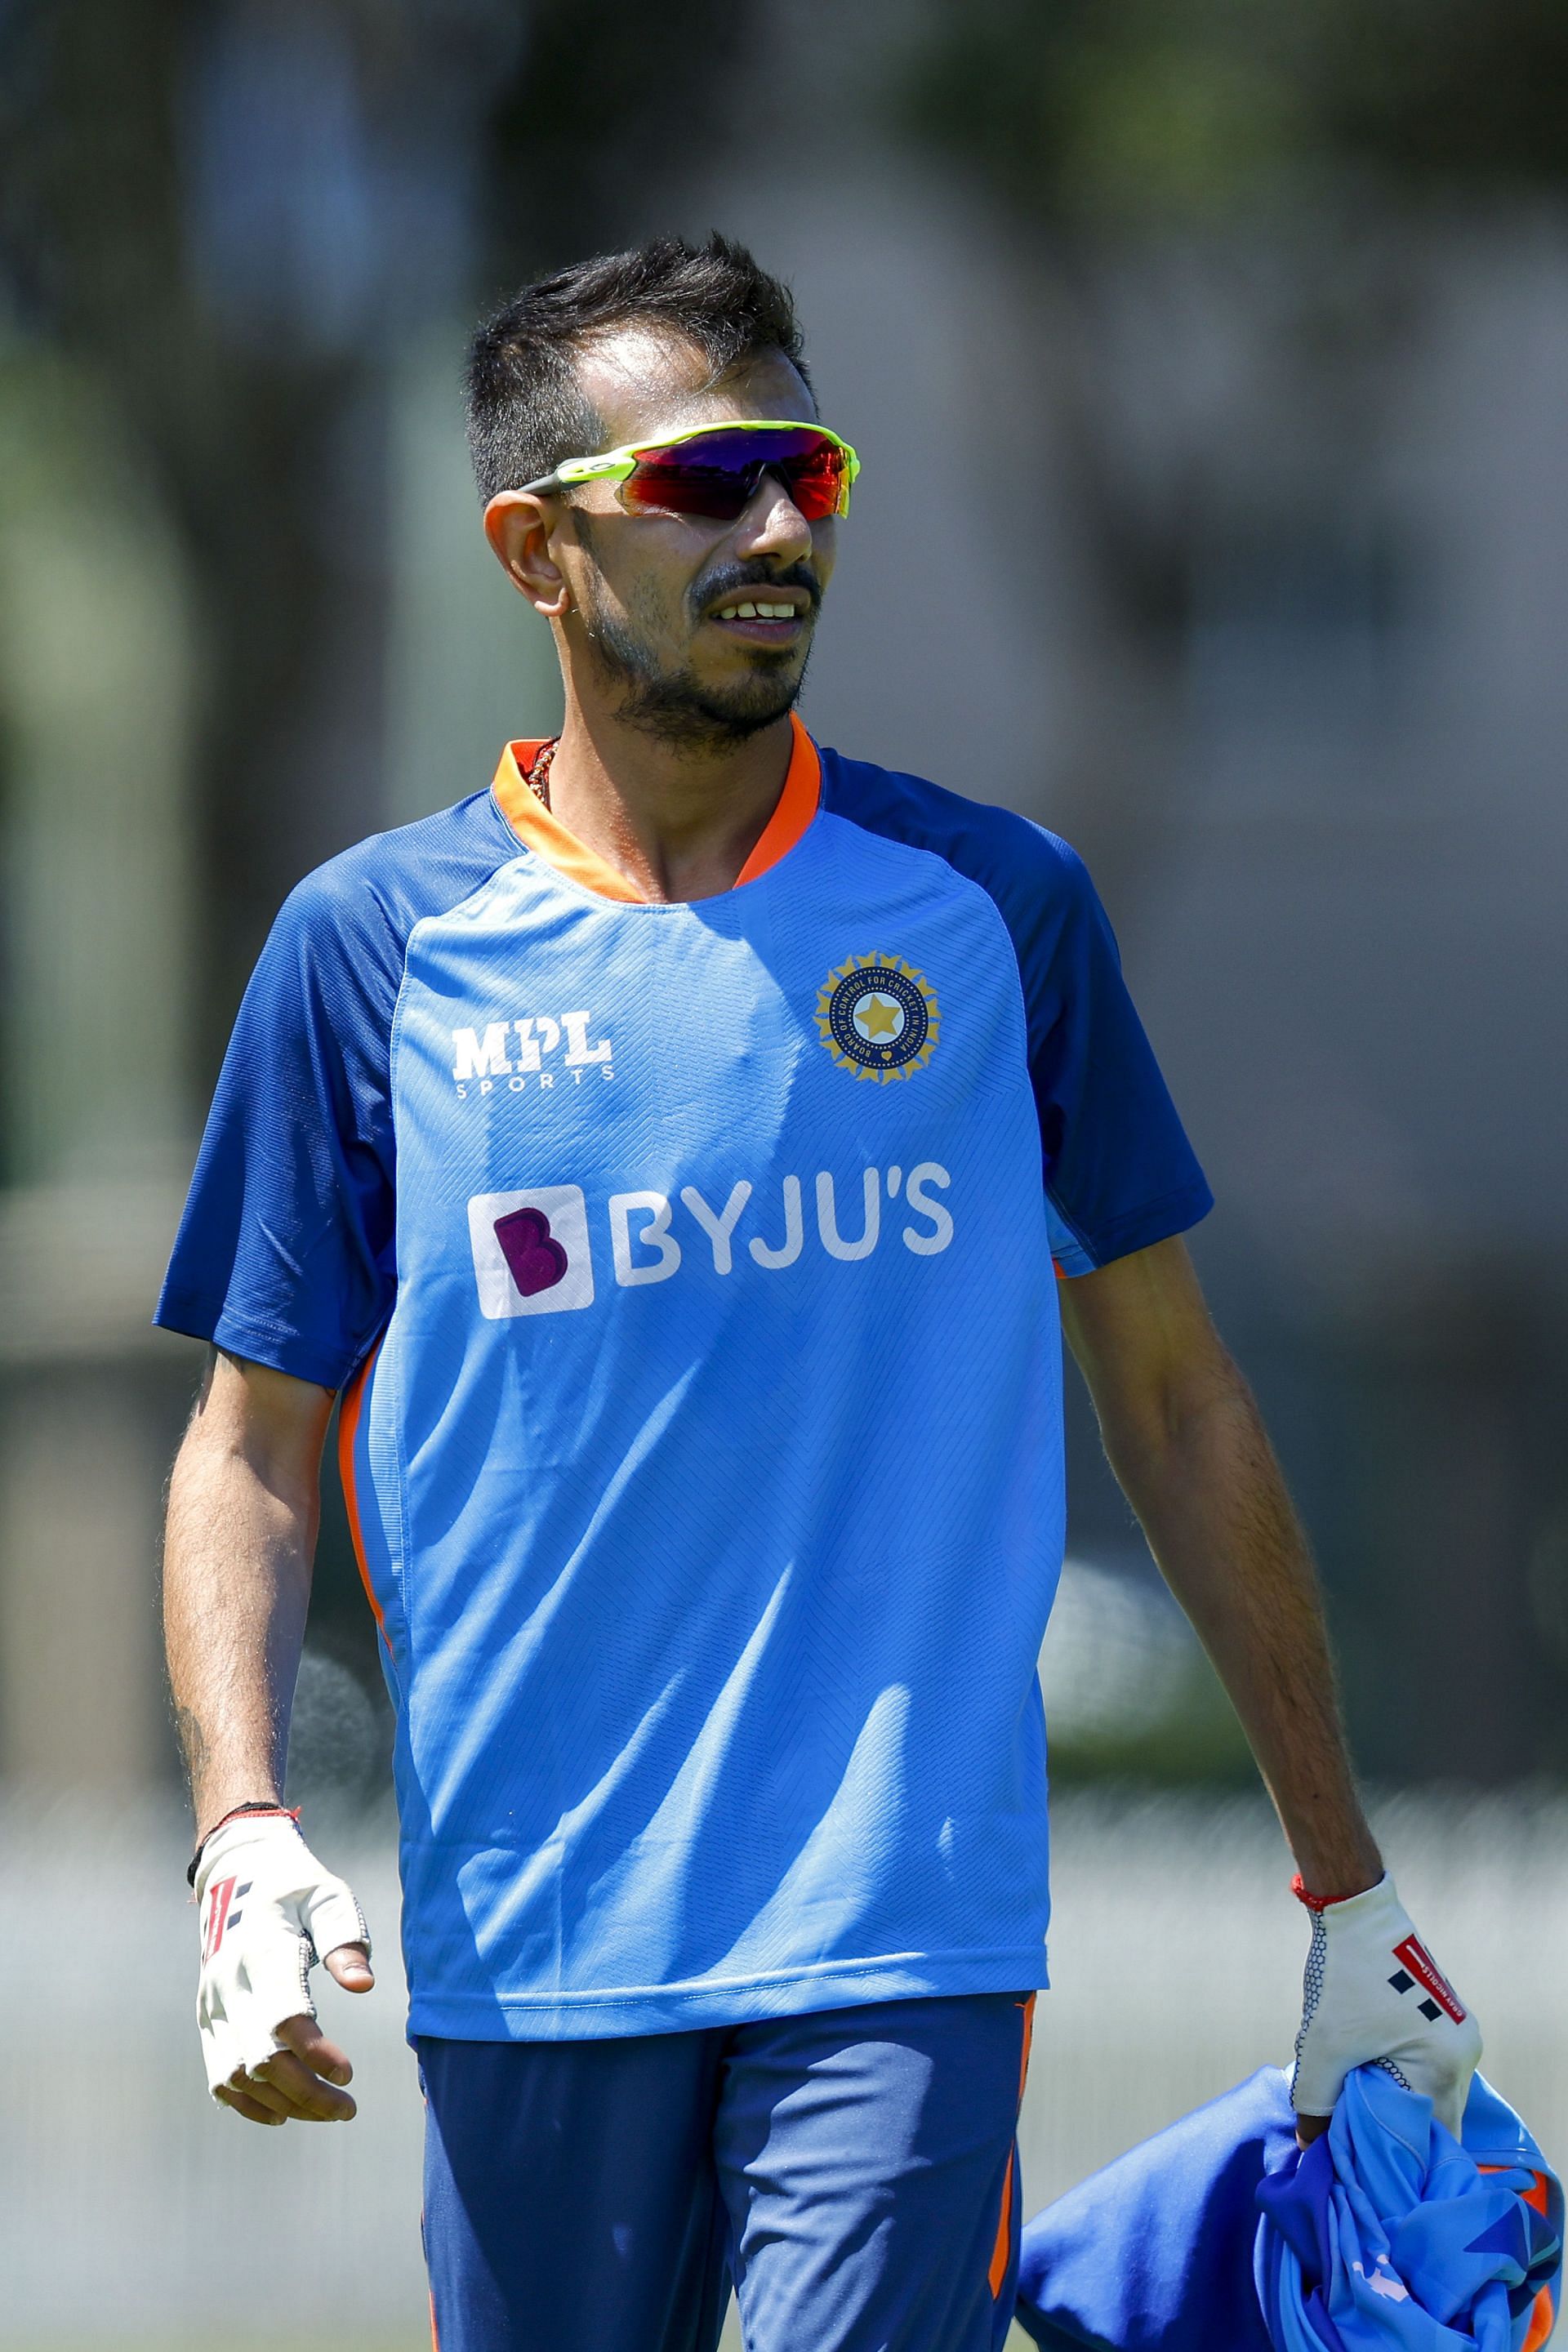 Yuzvendra Chahal has played for both MI and RCB.